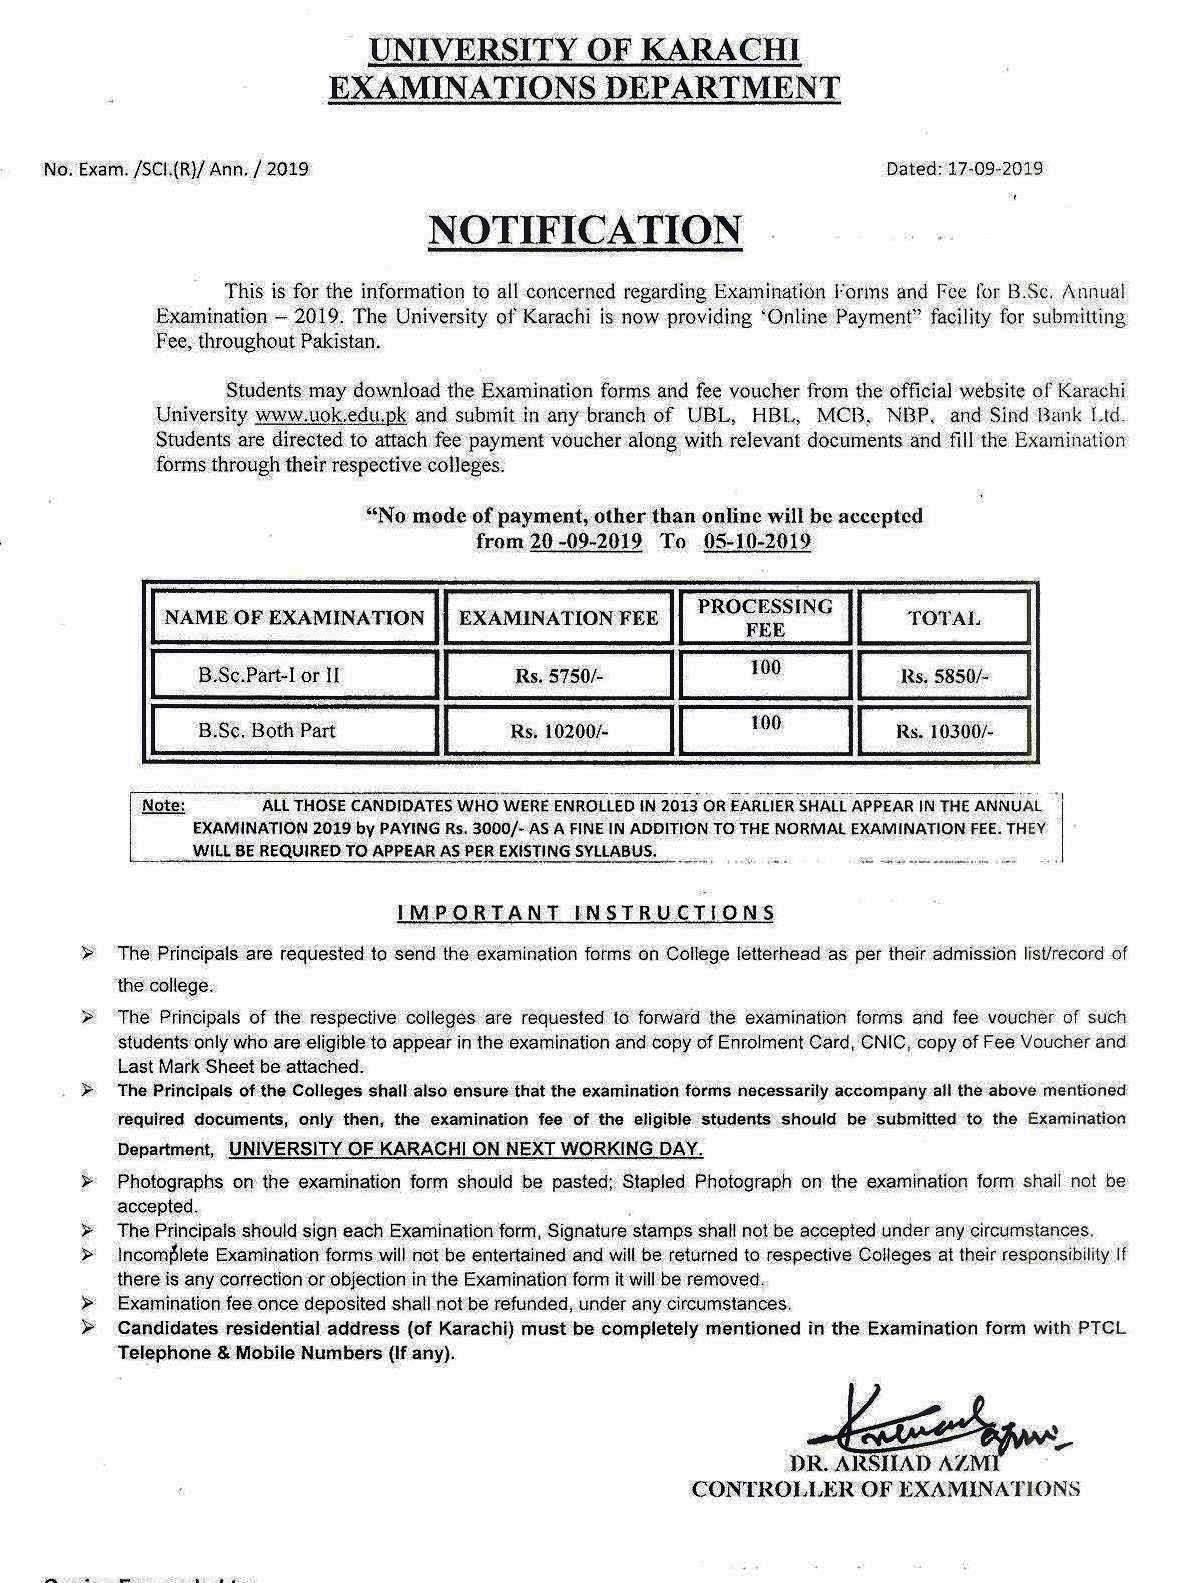 University of Karachi BA BSc online Exams form submission